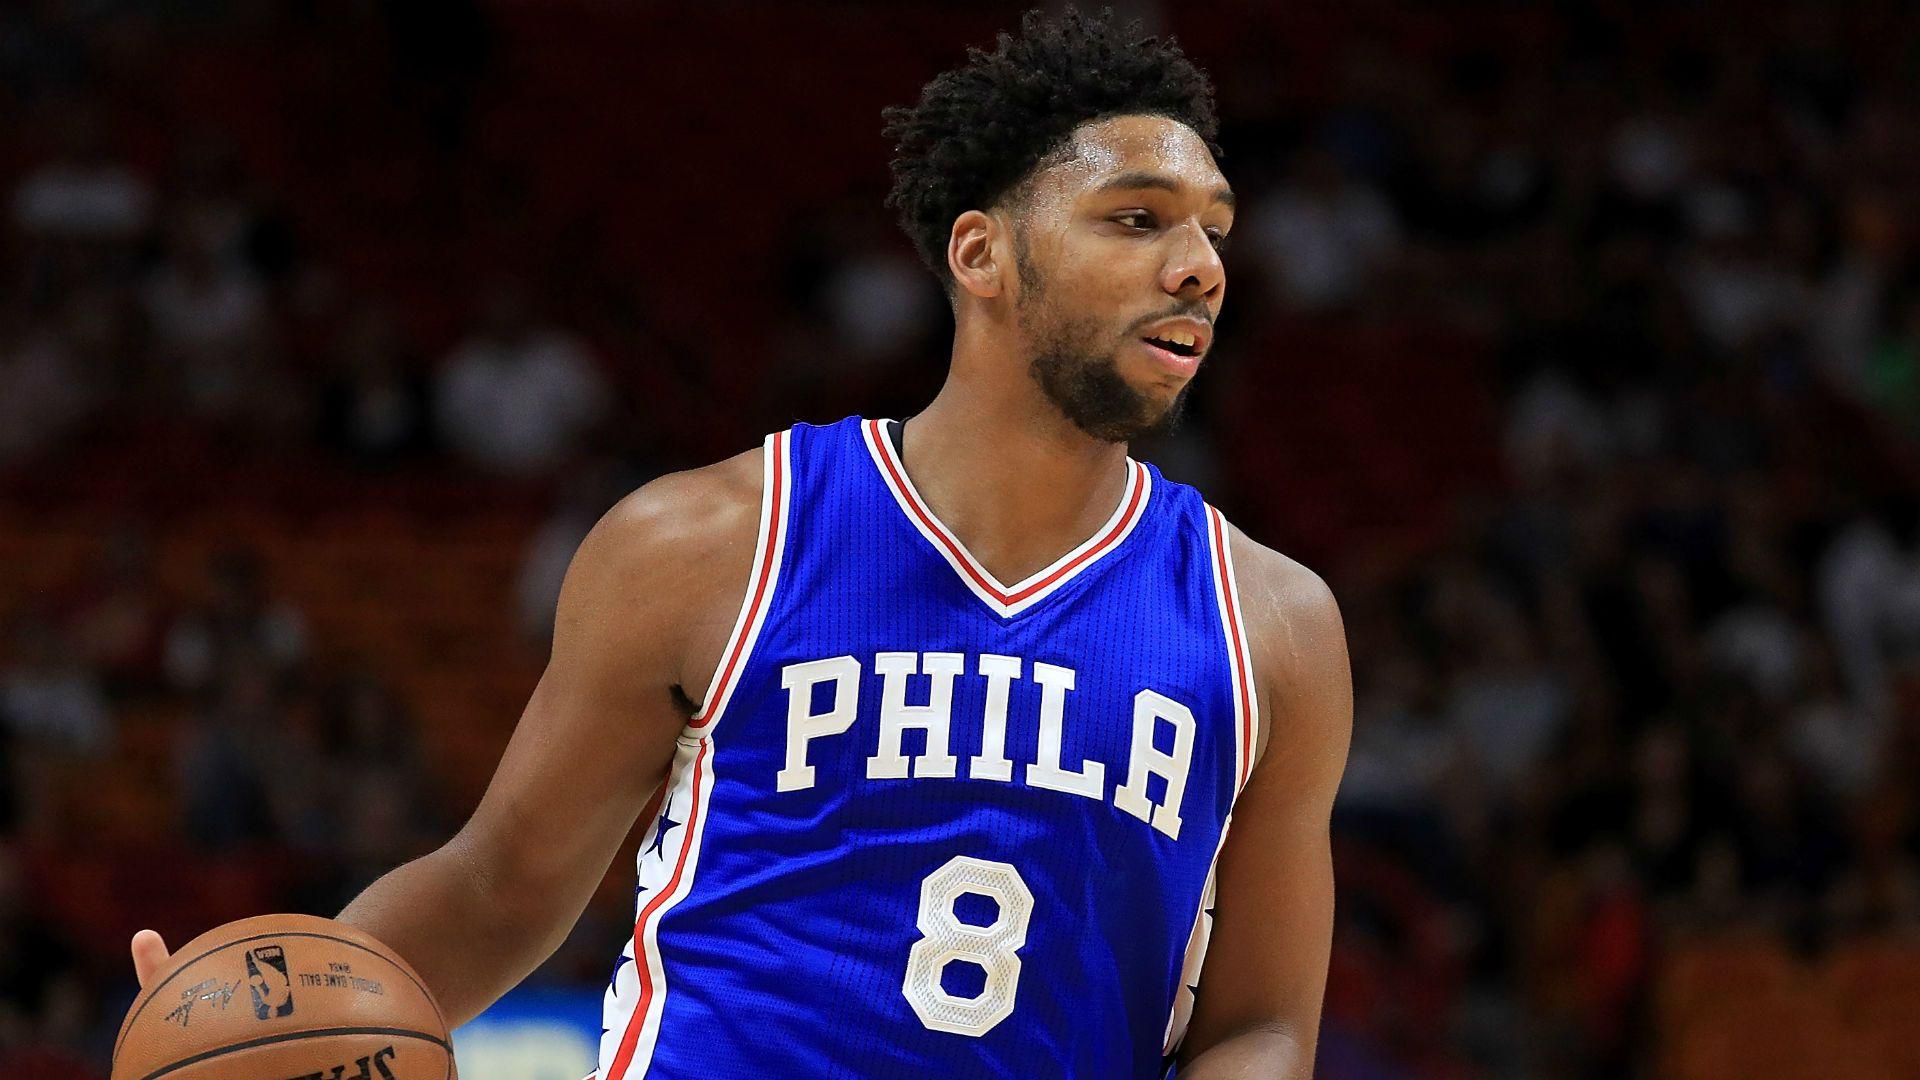 NBA free agency rumors: Jahlil Okafor drawing interest from several